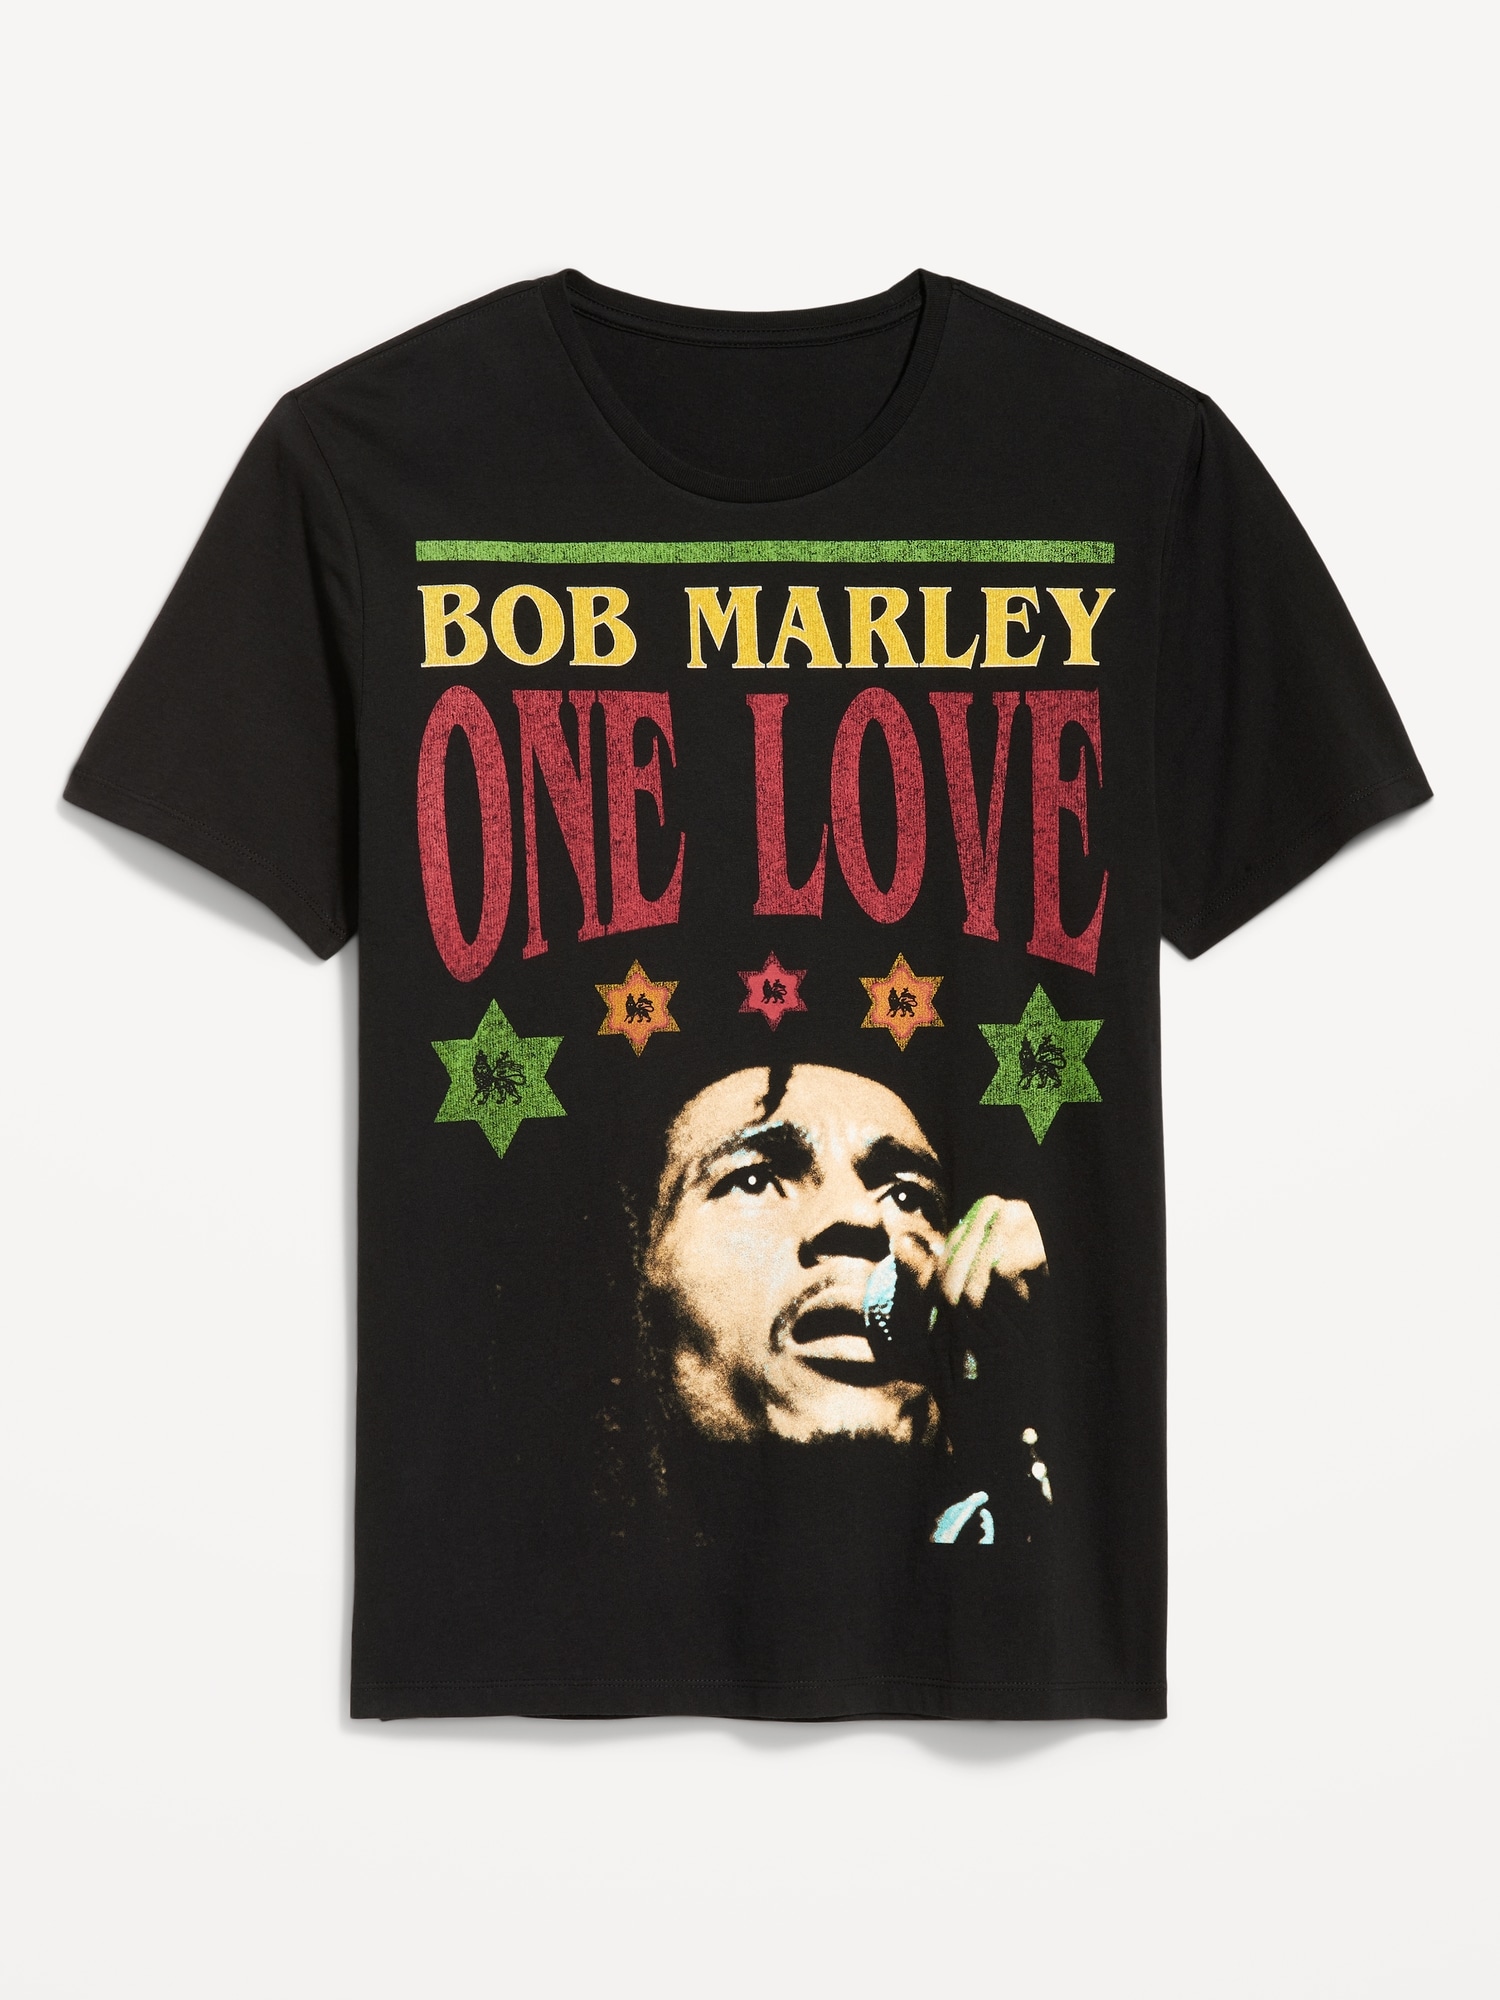 Bob Marley™ Gender-Neutral T-Shirt for Adults